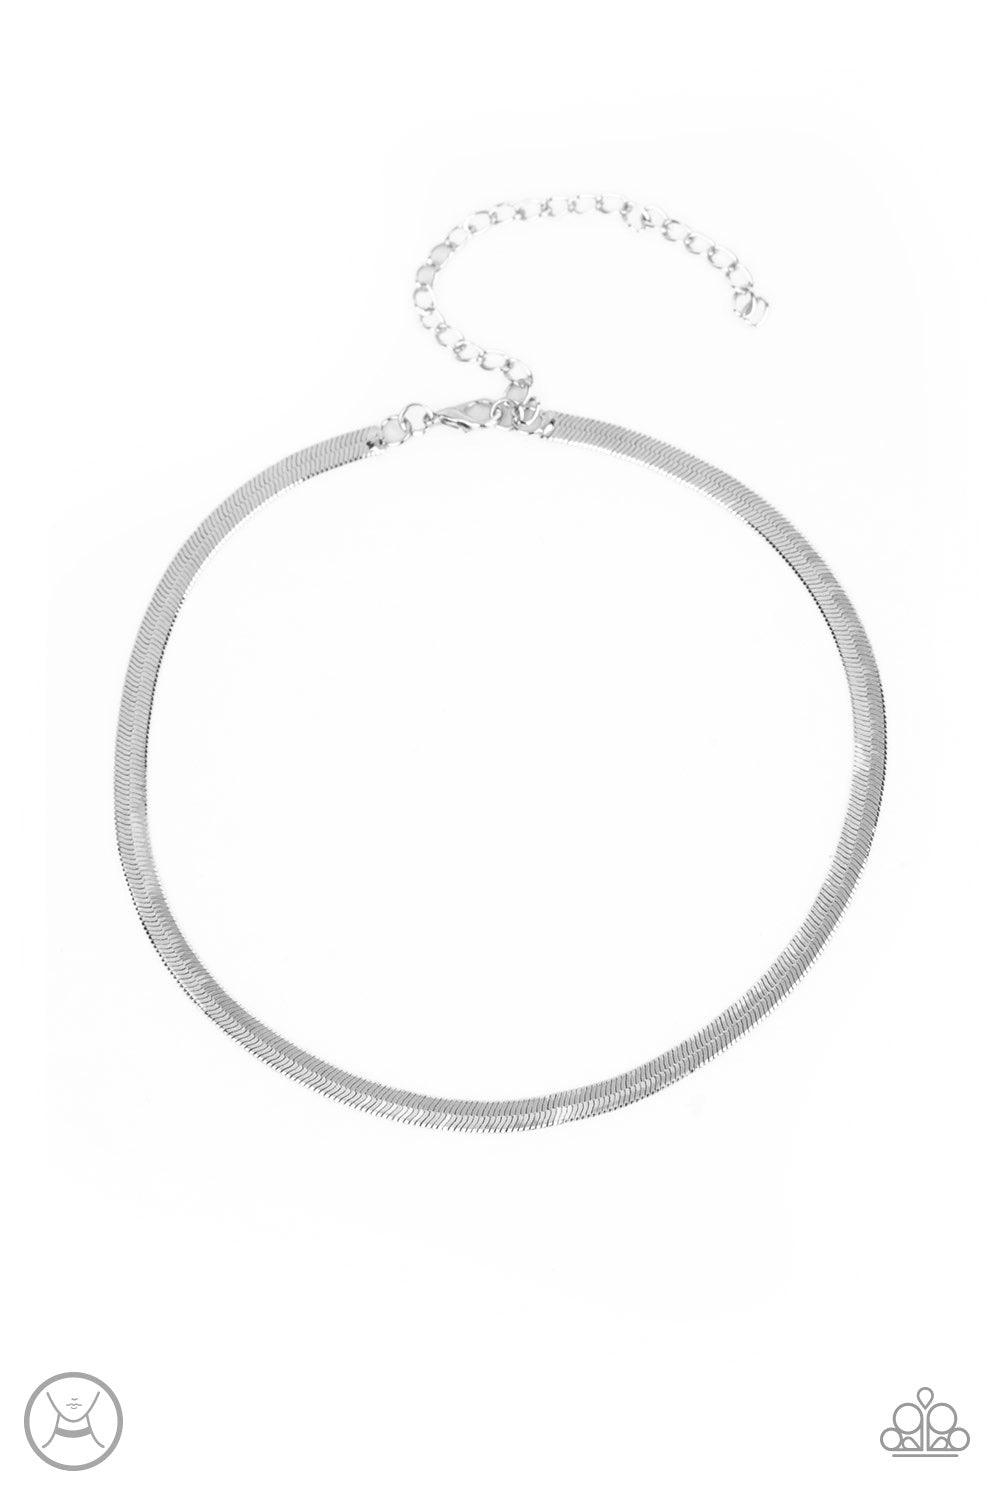 Paparazzi Accessories Serpentine Sheen -Silver A flat row of glistening silver snake chain wraps around the neck for a sleek shimmer. Features an adjustable clasp closure. Jewelry